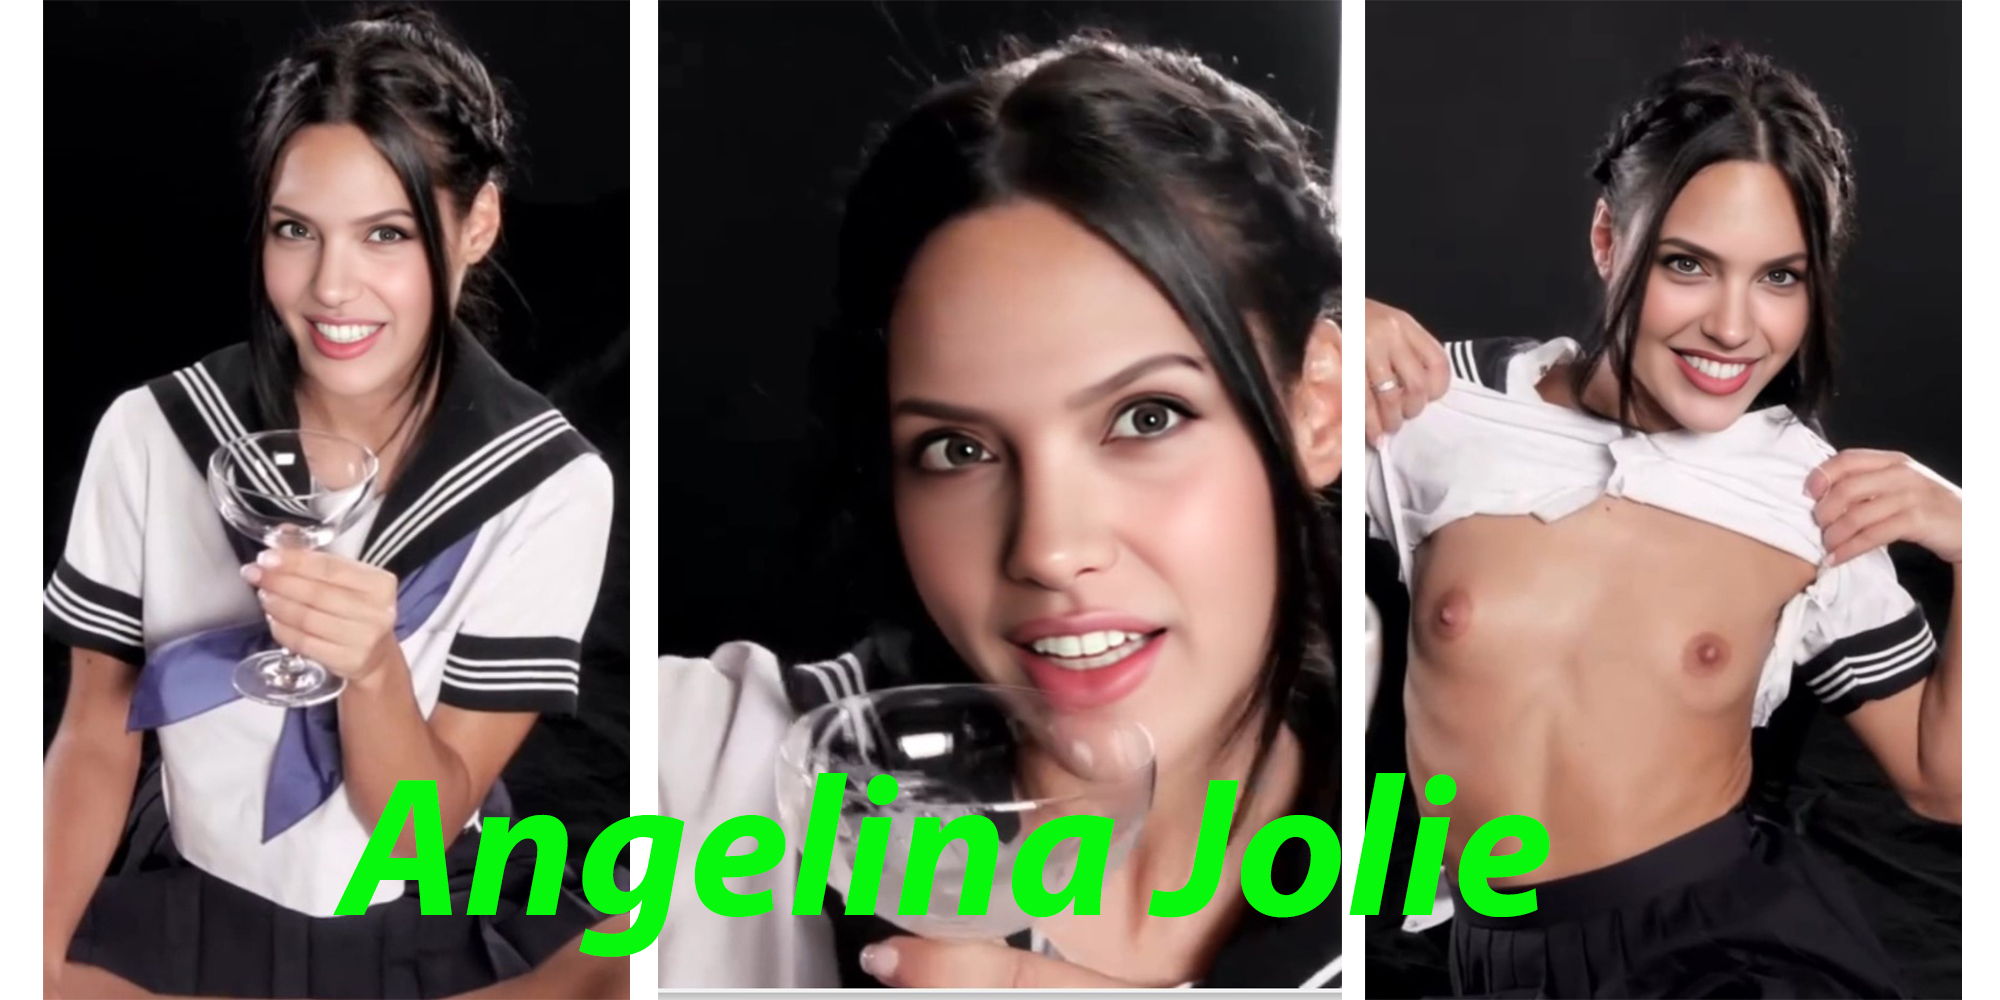 Angelina Jolie meets and greets her fans (full version)